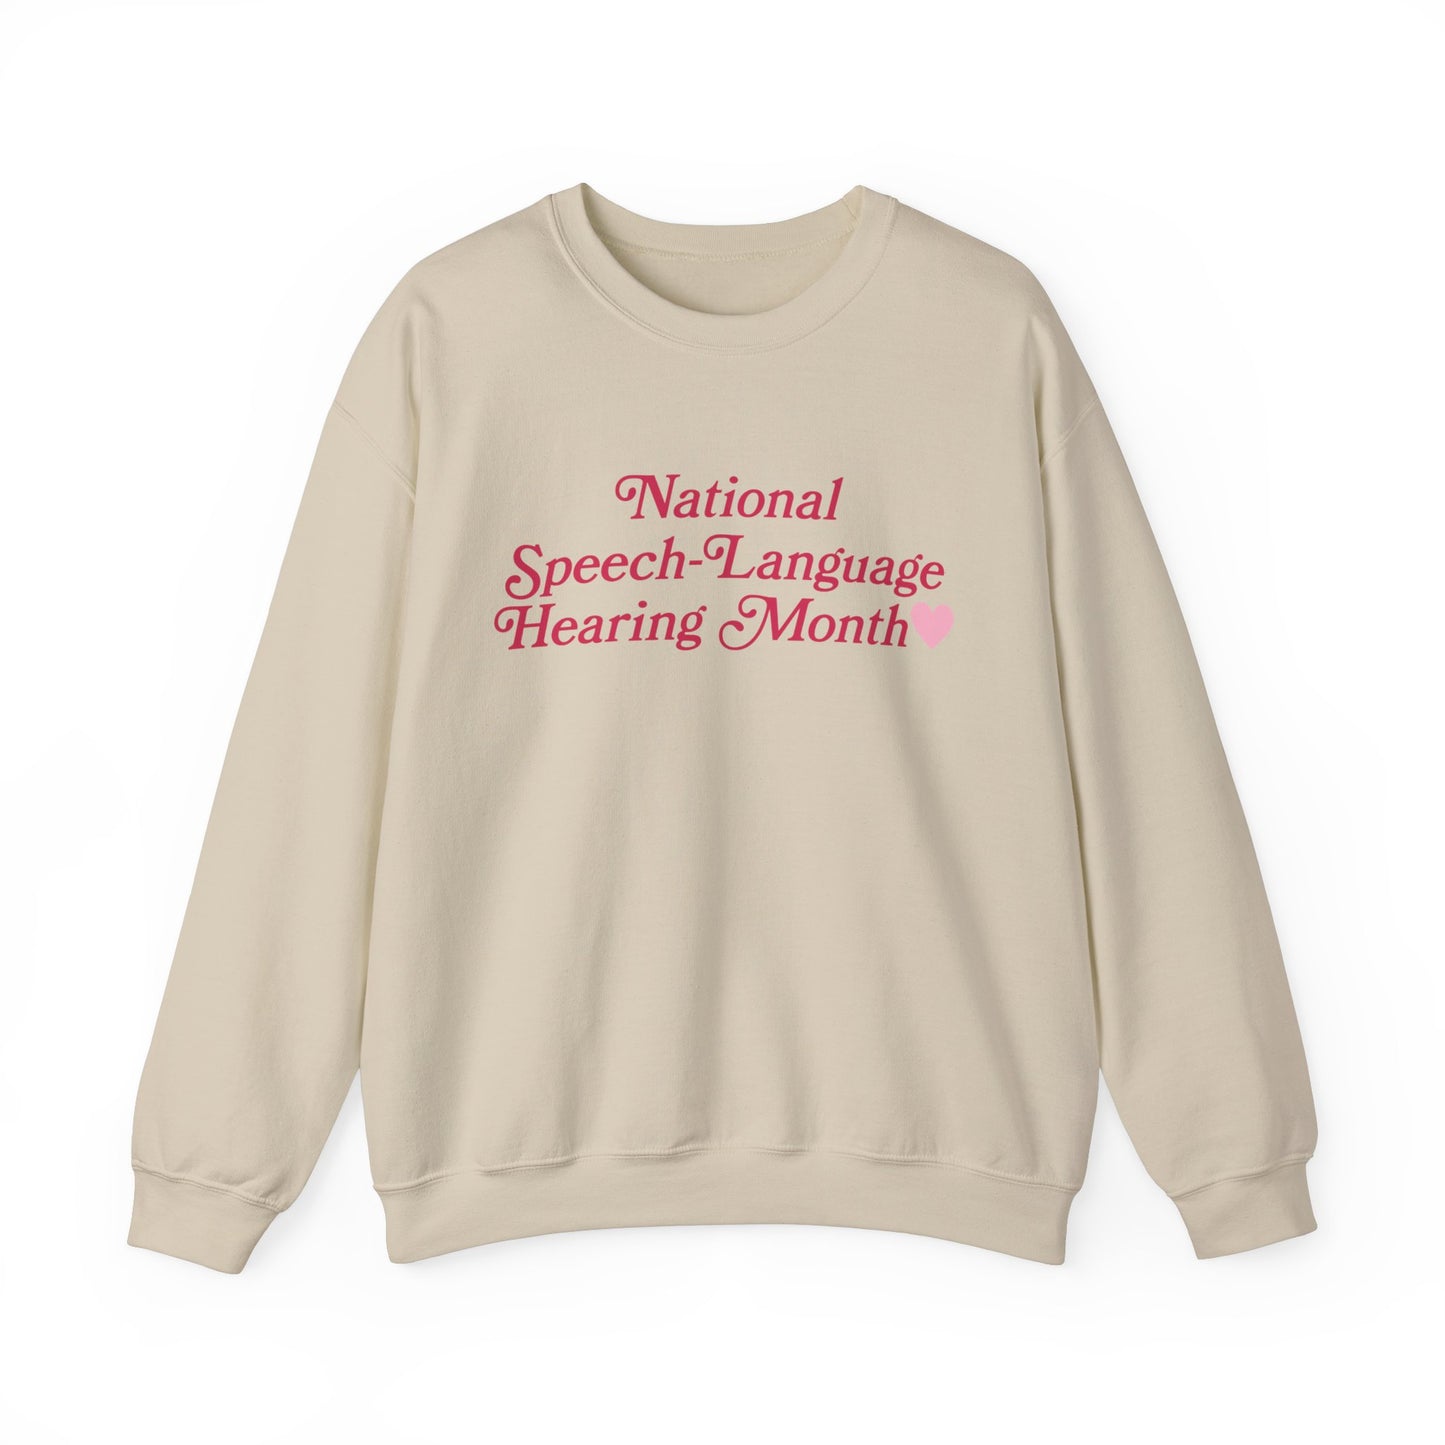 National Speech-Language-Hearing Month Sweatshirt | Front and Back Print